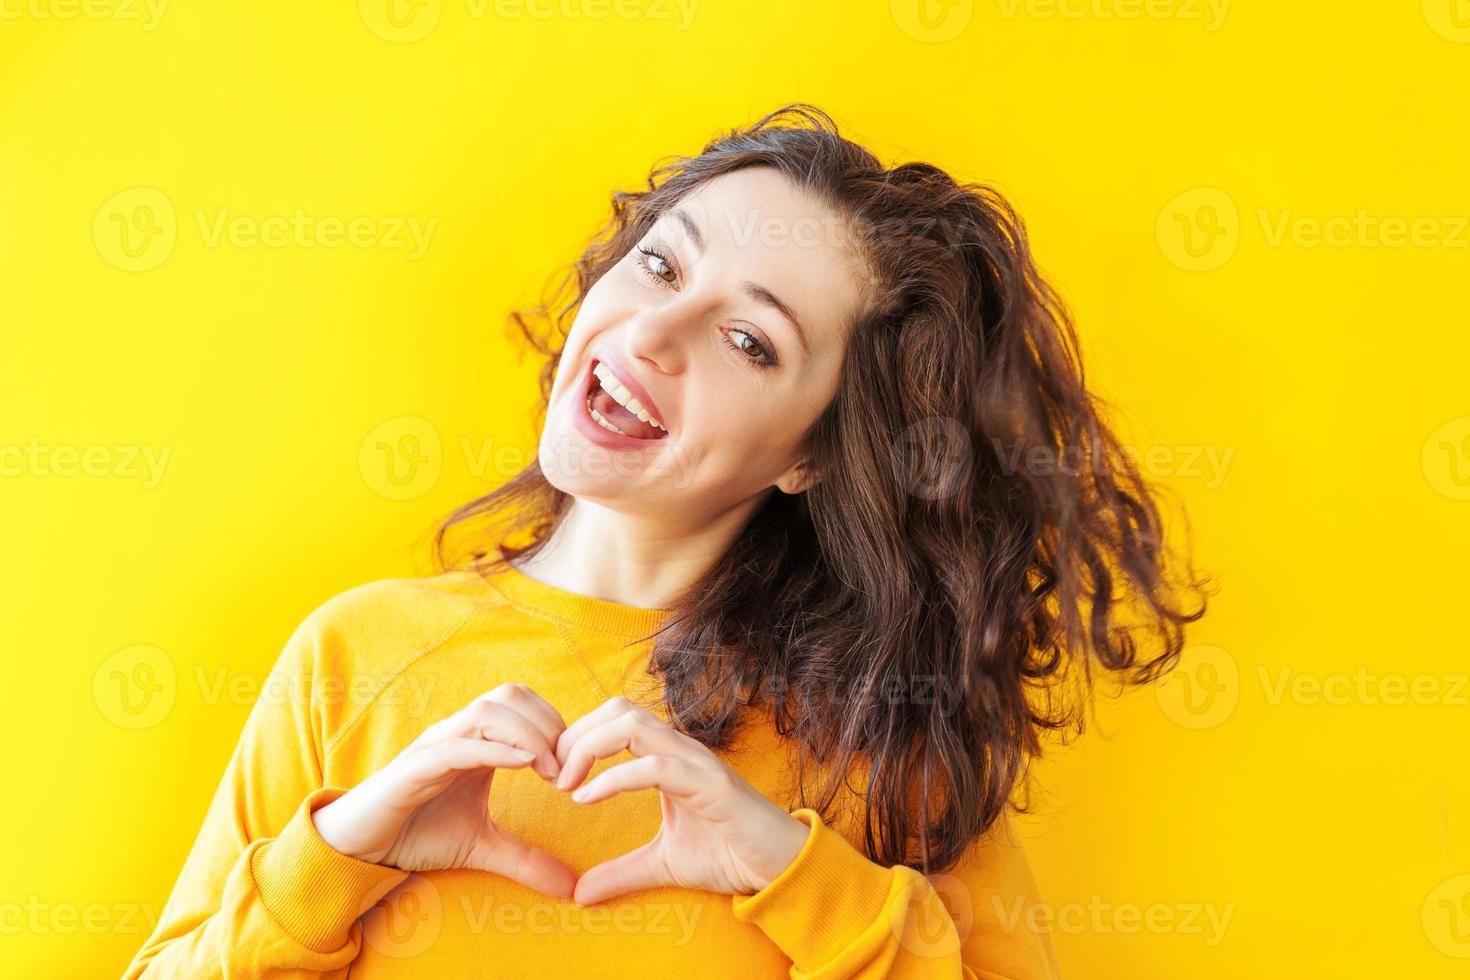 Love, heart shape, peace. Beauty portrait young happy positive woman showing heart sign with hands on yellow background isolated. European girl. Positive human emotion facial expression body language. photo